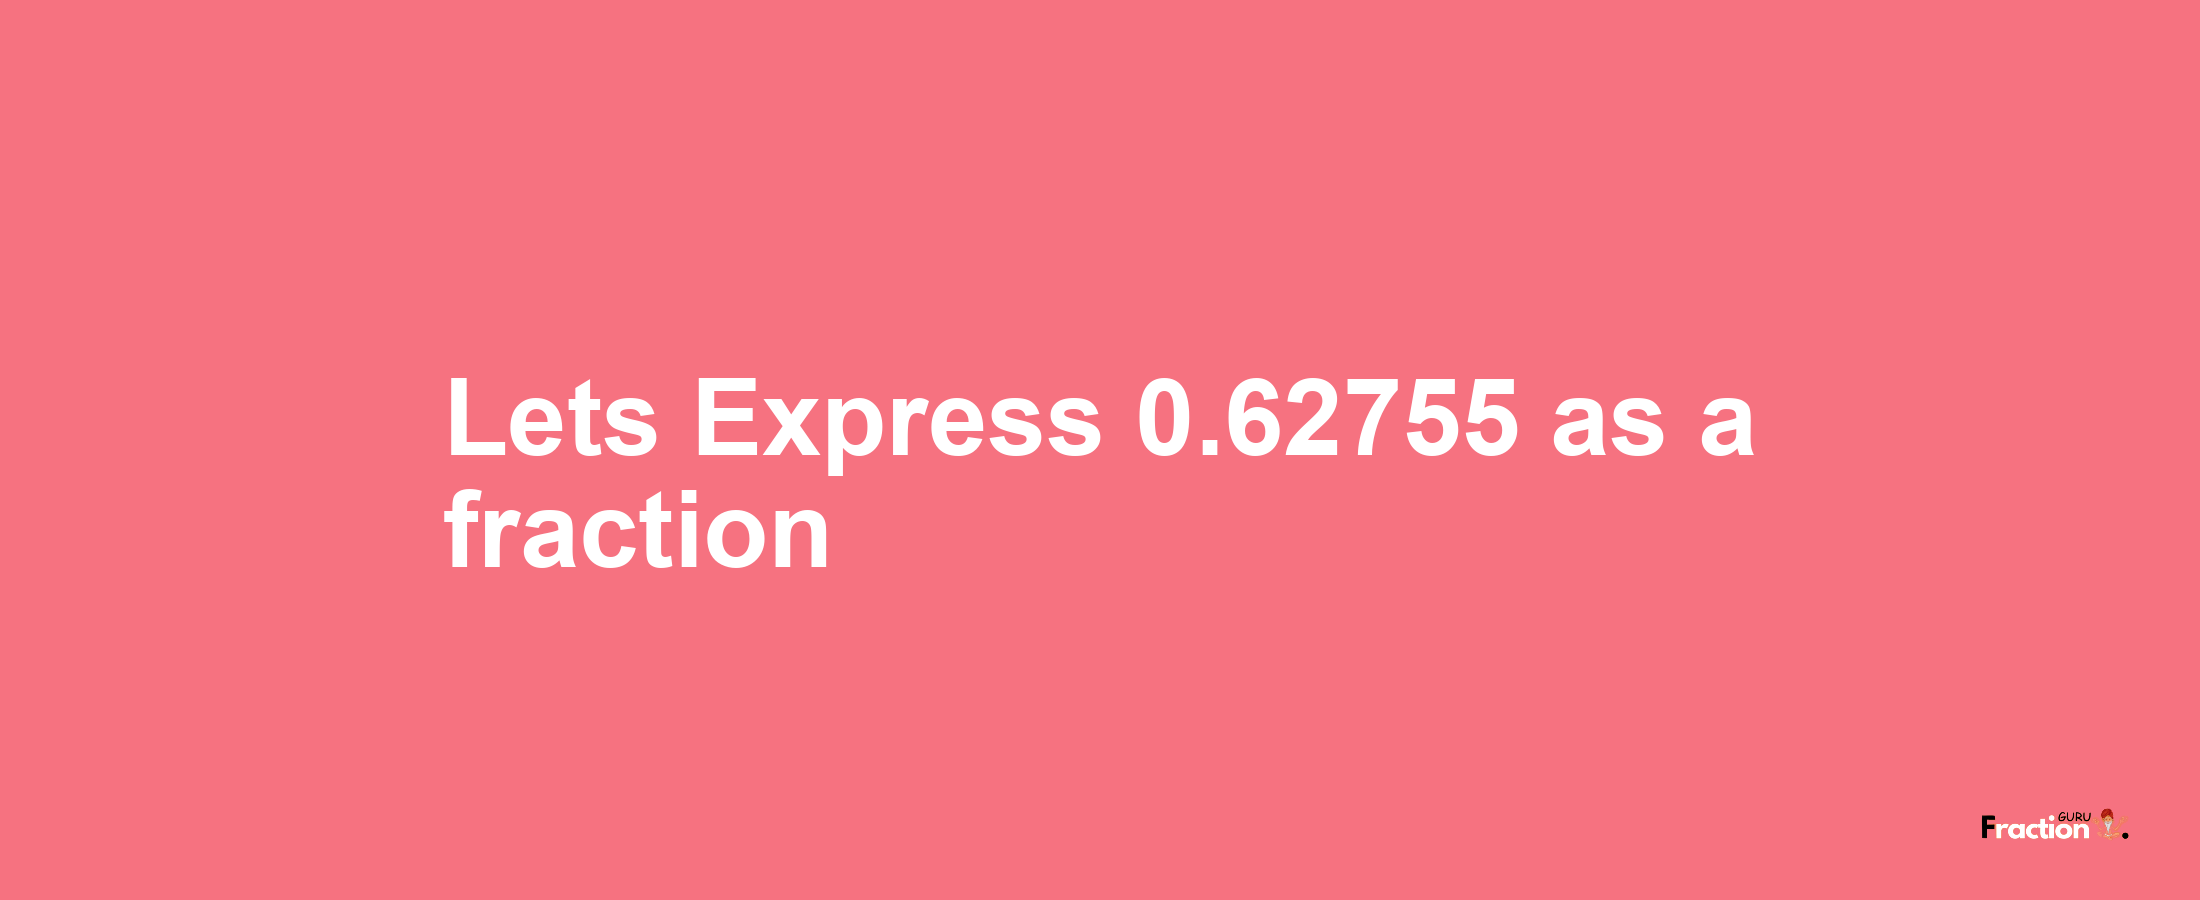 Lets Express 0.62755 as afraction